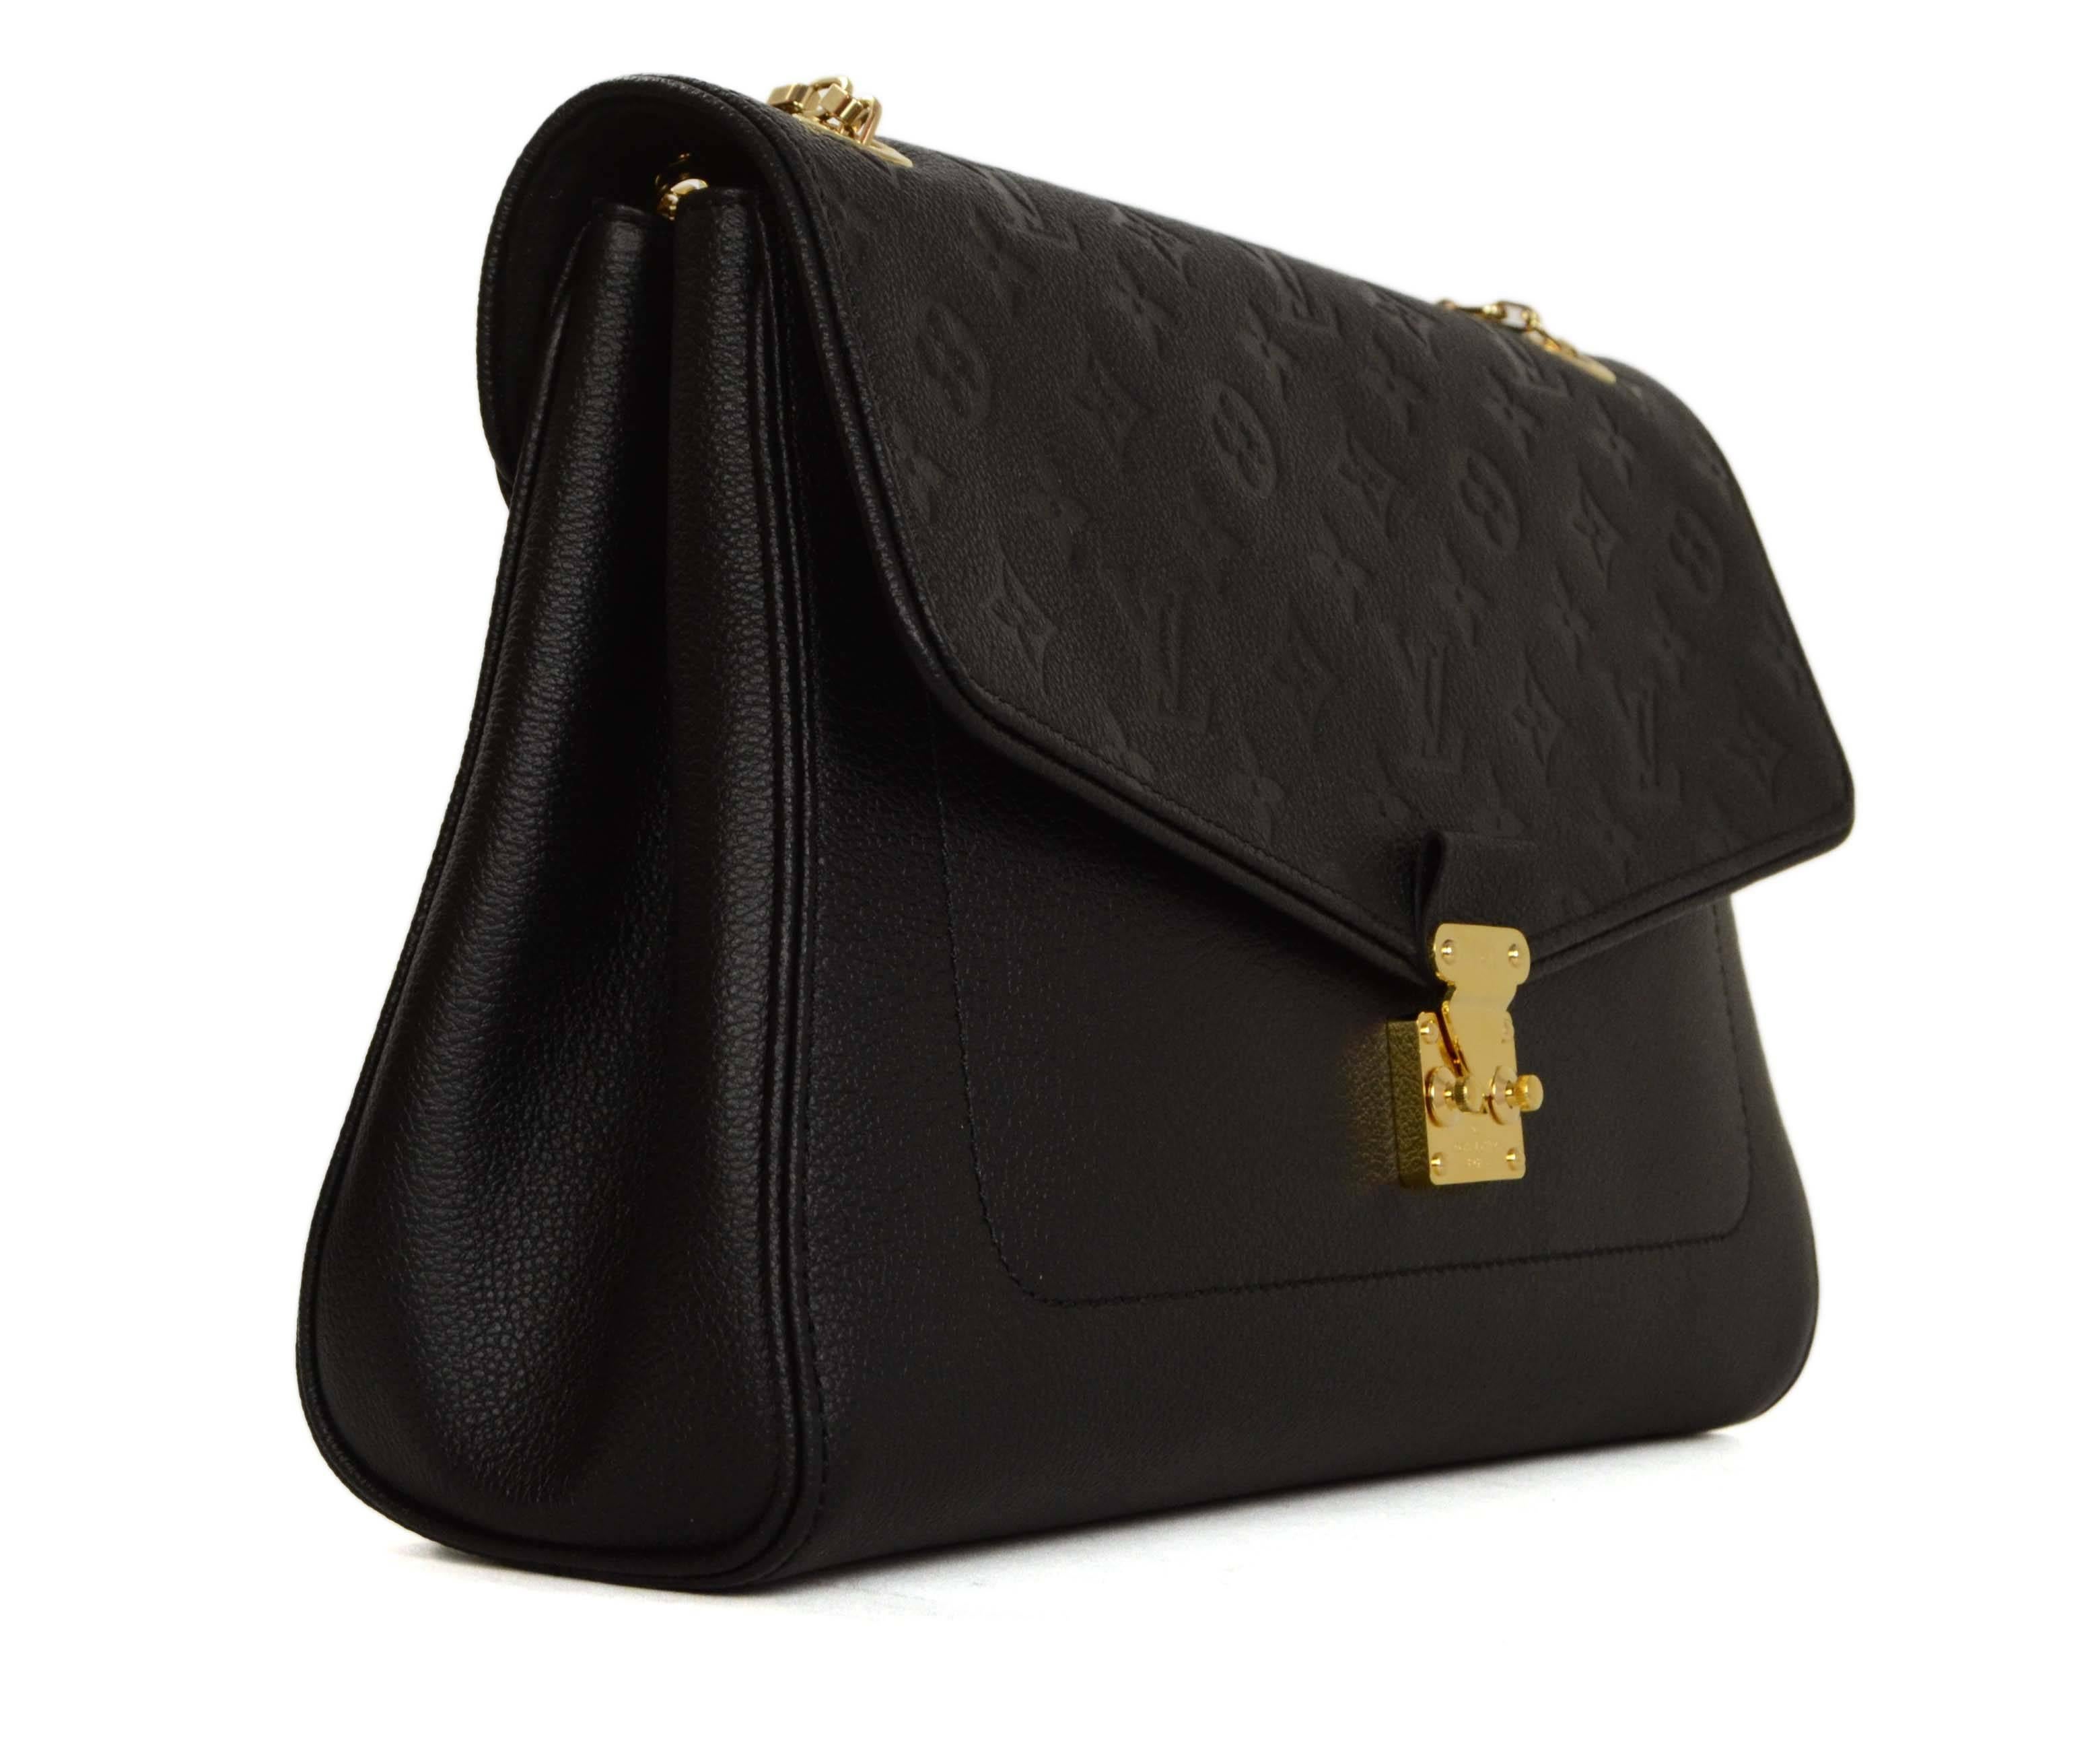 Features adjustable shoulder strap that allows bag to be worn on the shoulder or as a crossbody.  Embossed Louis Vuitton monogram on flap of bag.

-Made In: France
-Year of Production: 2015
-Color: Black
-Hardware: Goldtone
-Materials: Calf